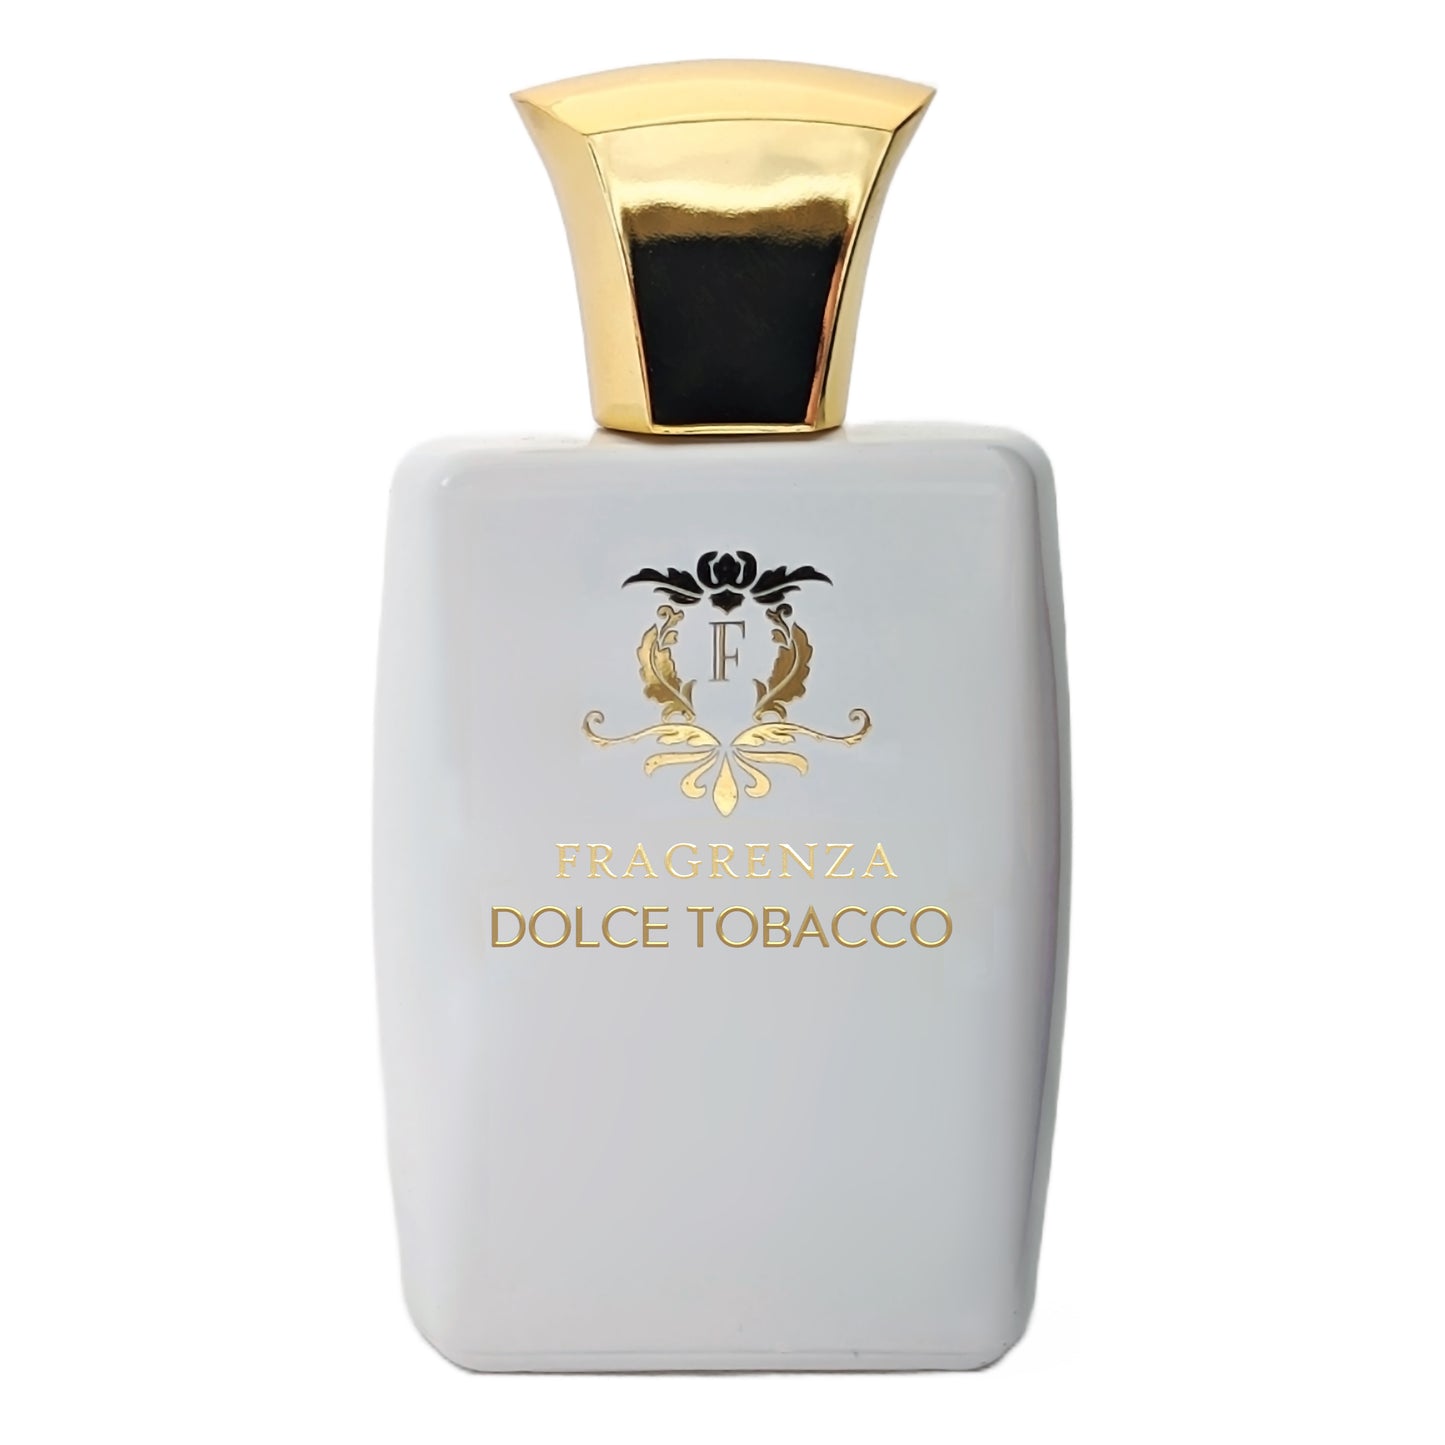 Dolce Tobacco